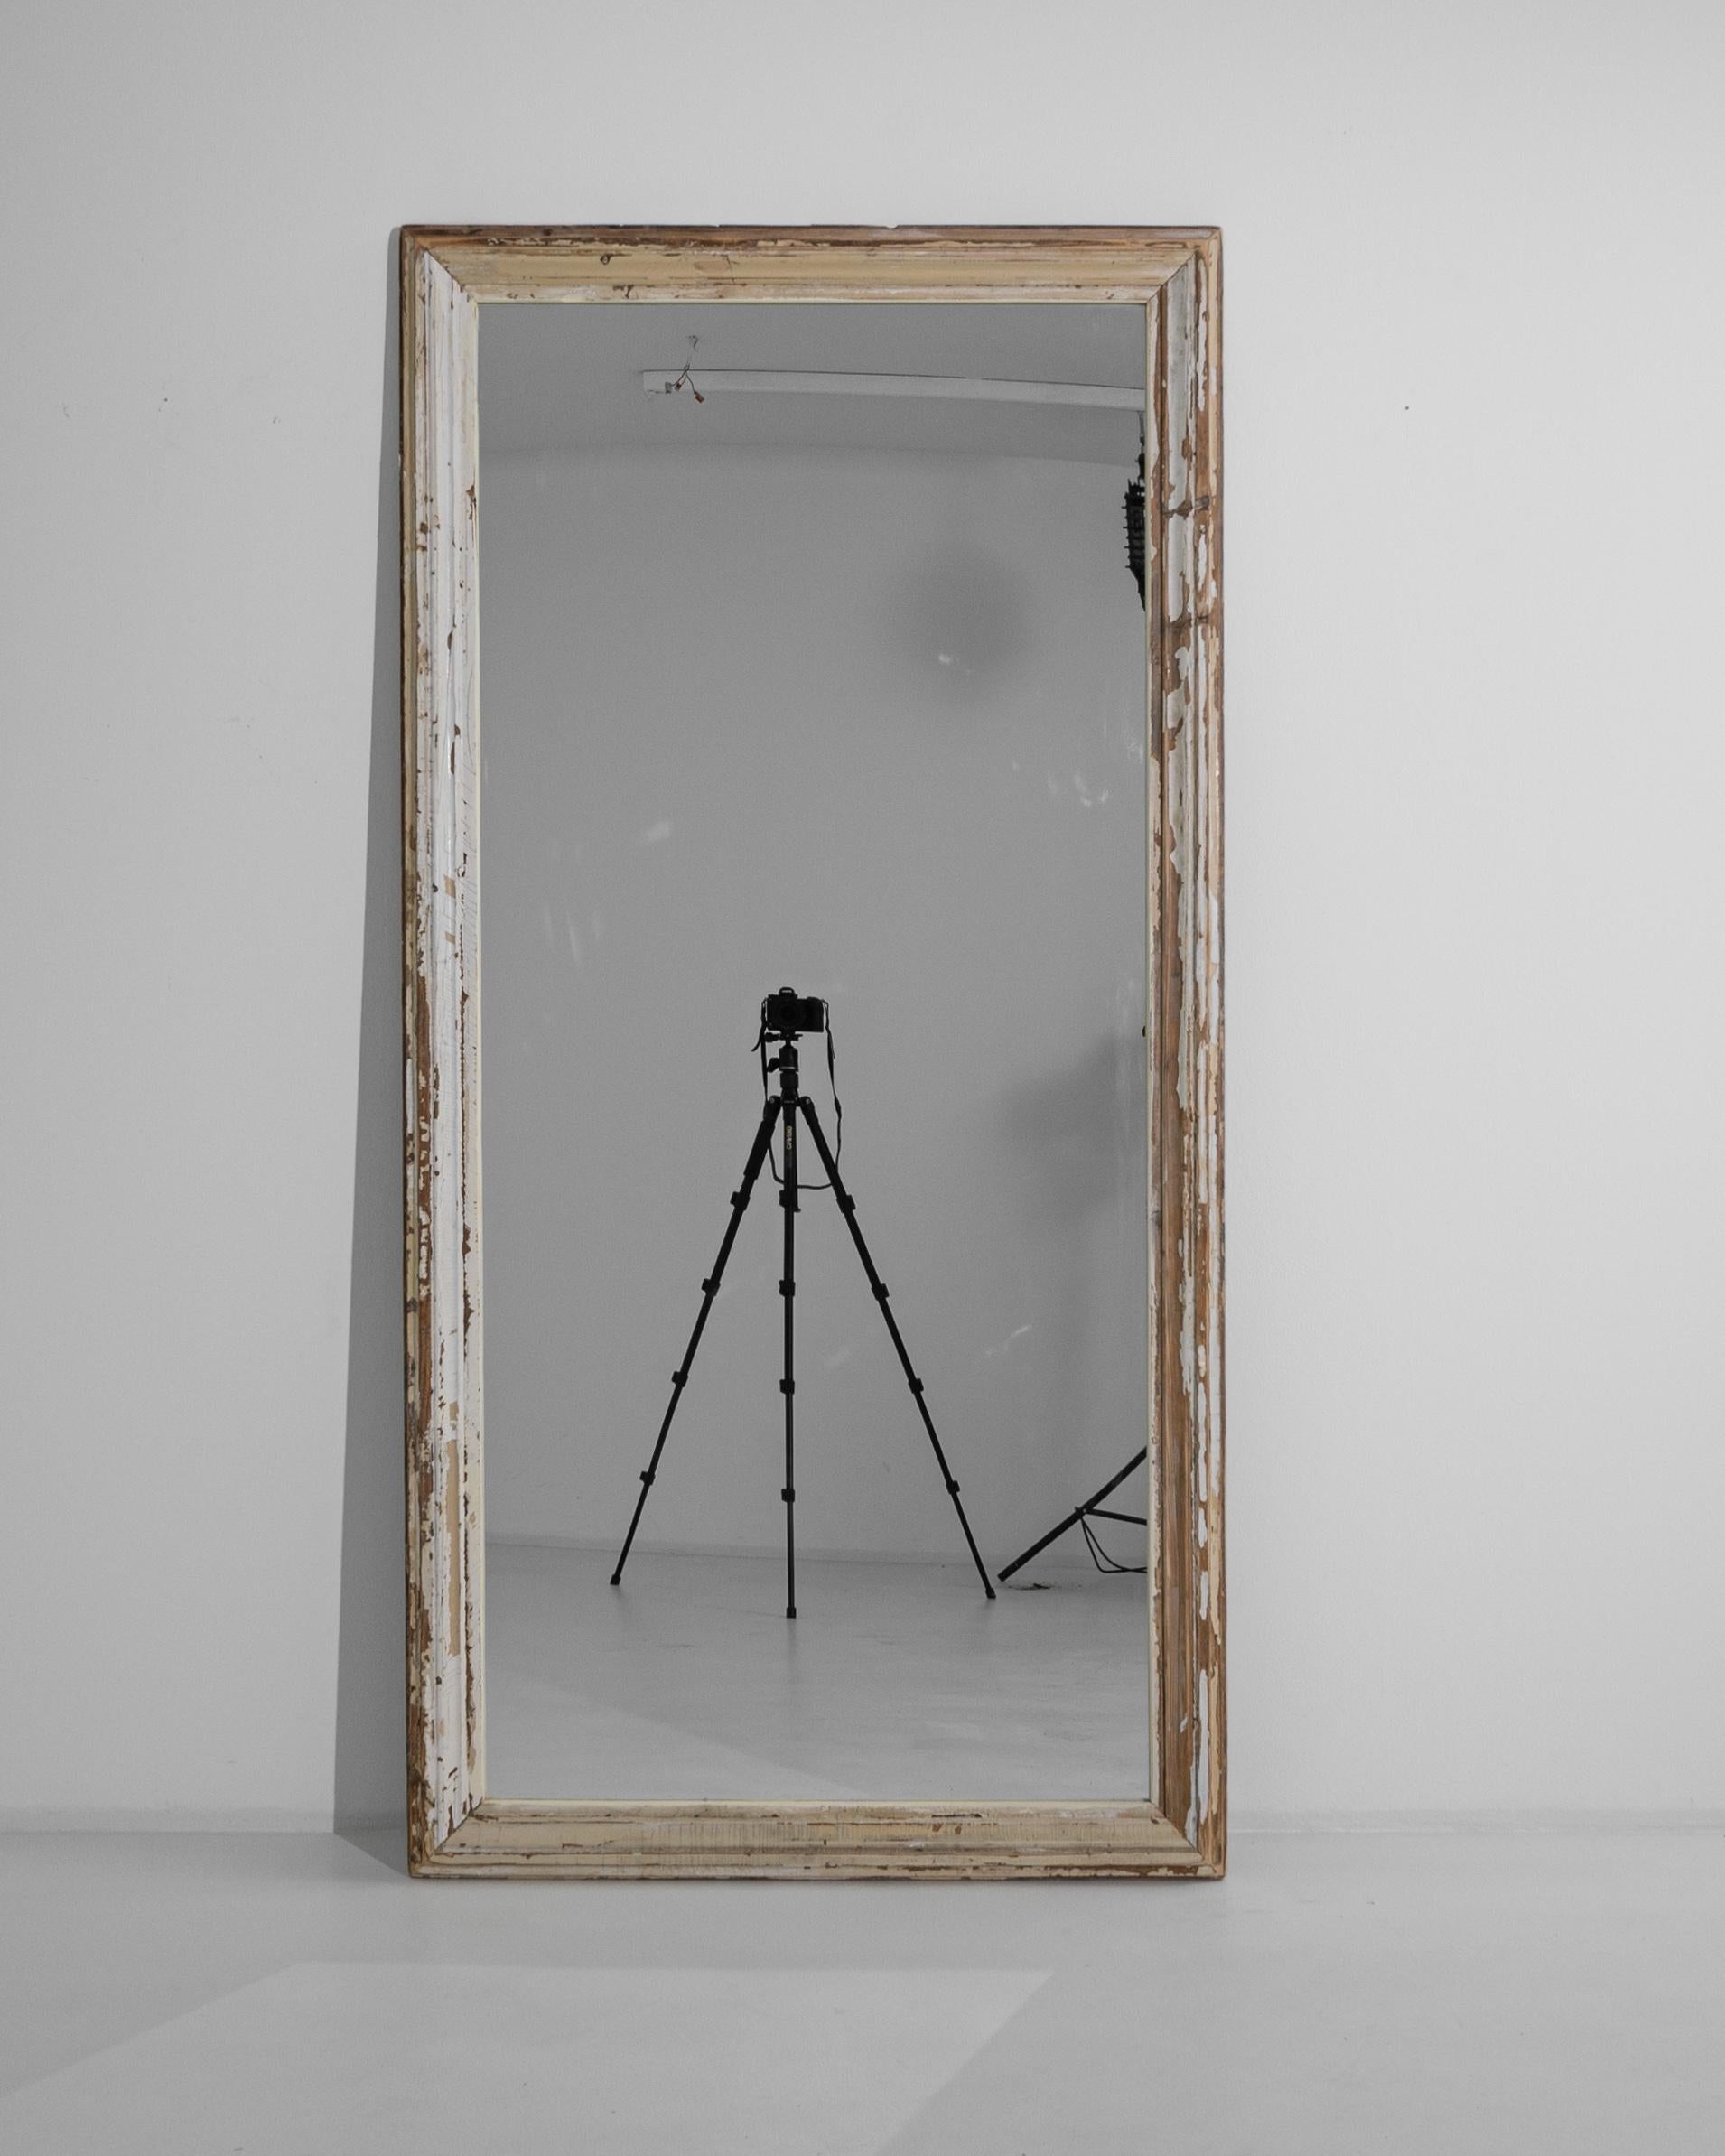 This 1900s French Wood White Patinated Floor Mirror is a captivating piece that brings the allure of vintage French decor into any space. The distressed white patina on the wooden frame adds a layer of rustic charm, suggesting stories and histories